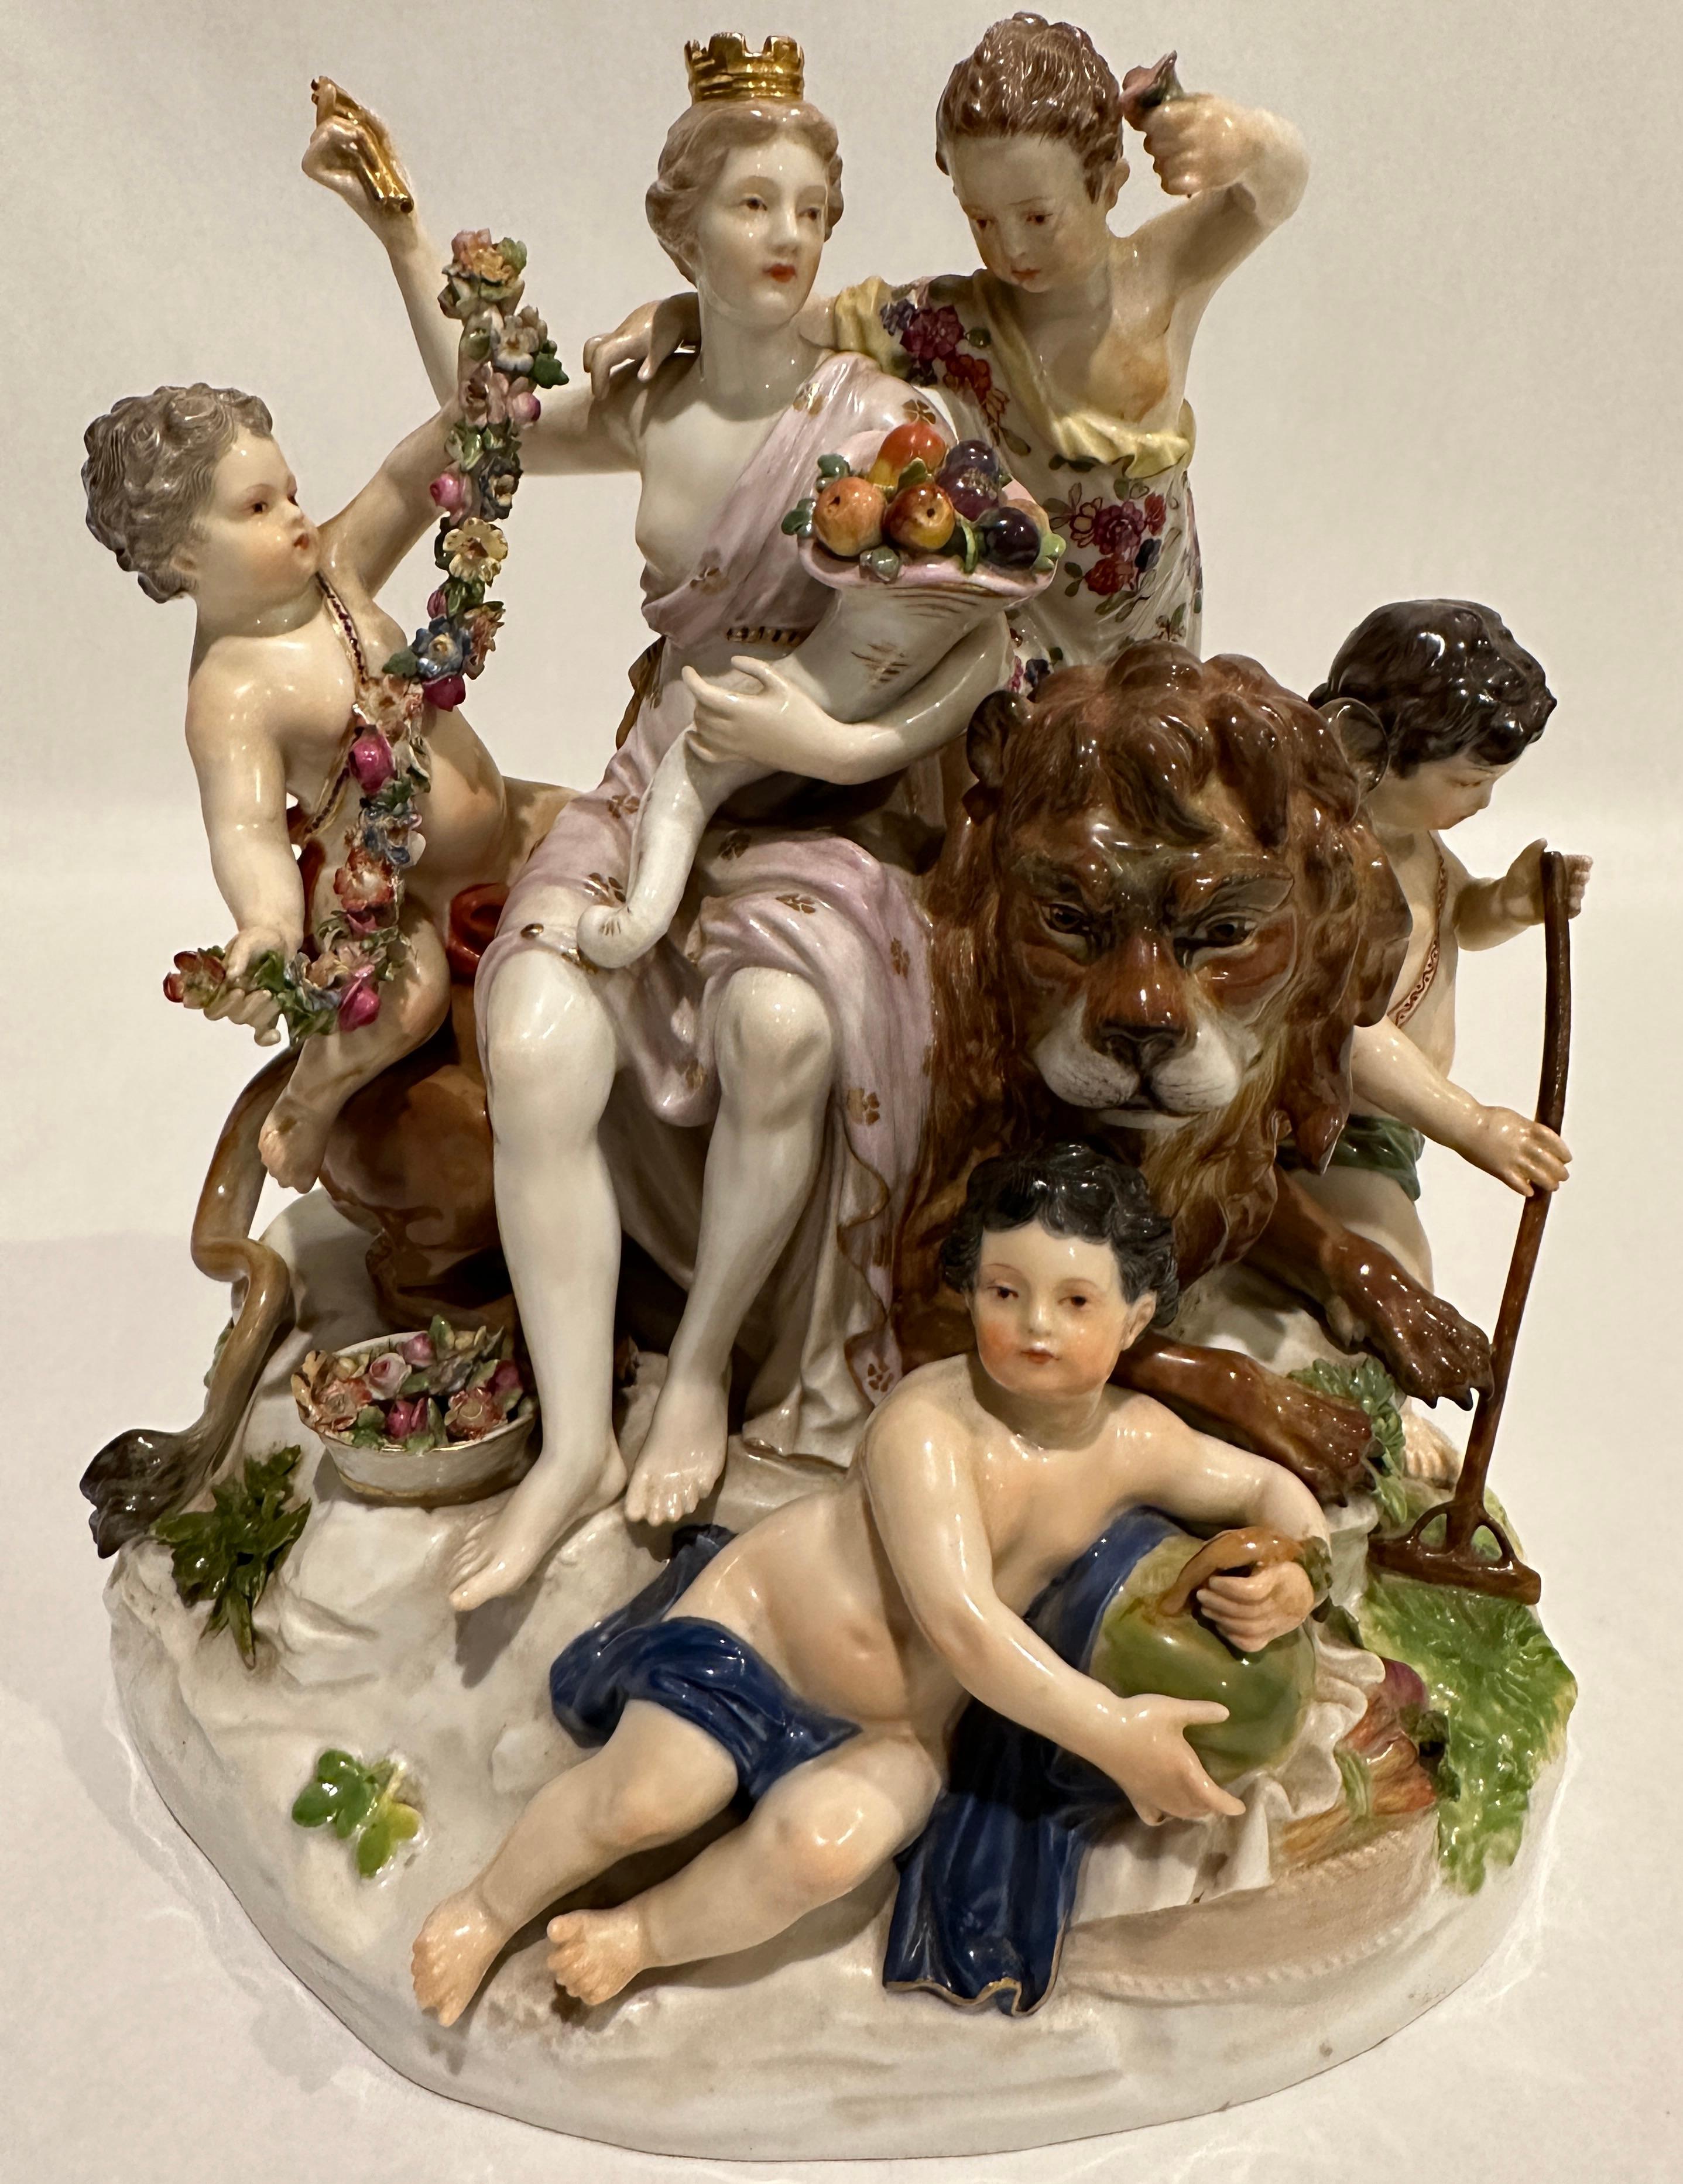 Large Meissen group of figurines which are Allegory of Earth assembled around a Lion's Figurine. 
Manufactory: Meissen Hallmarked: Blue Meissen Sword Mark (underglazed) First quality model number D 83 / painter's number 49 / former's number 65